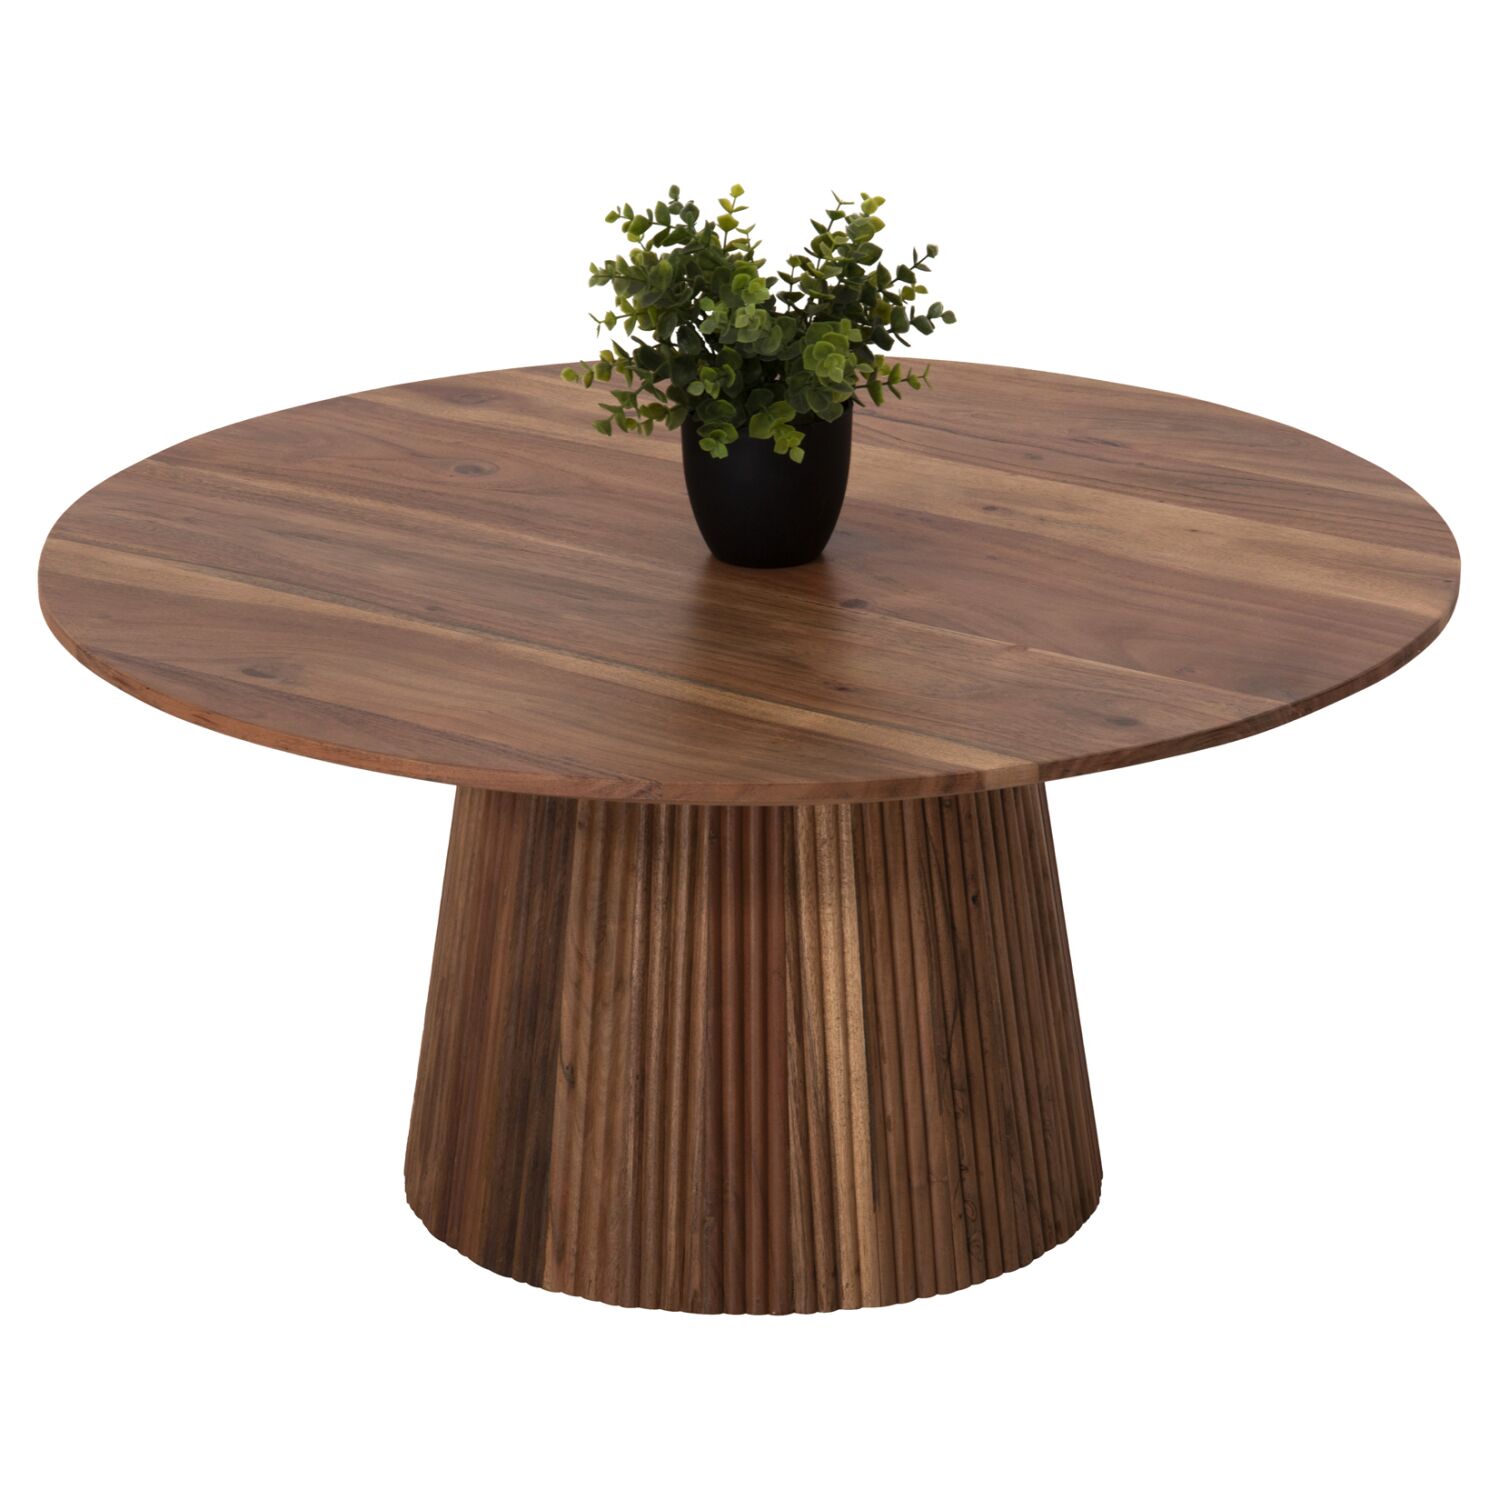 COFFEE TABLE ROUND GROOT HM9697 SOLID ACACIA WOOD IN NATURAL COLOR Φ80x48Hcm.